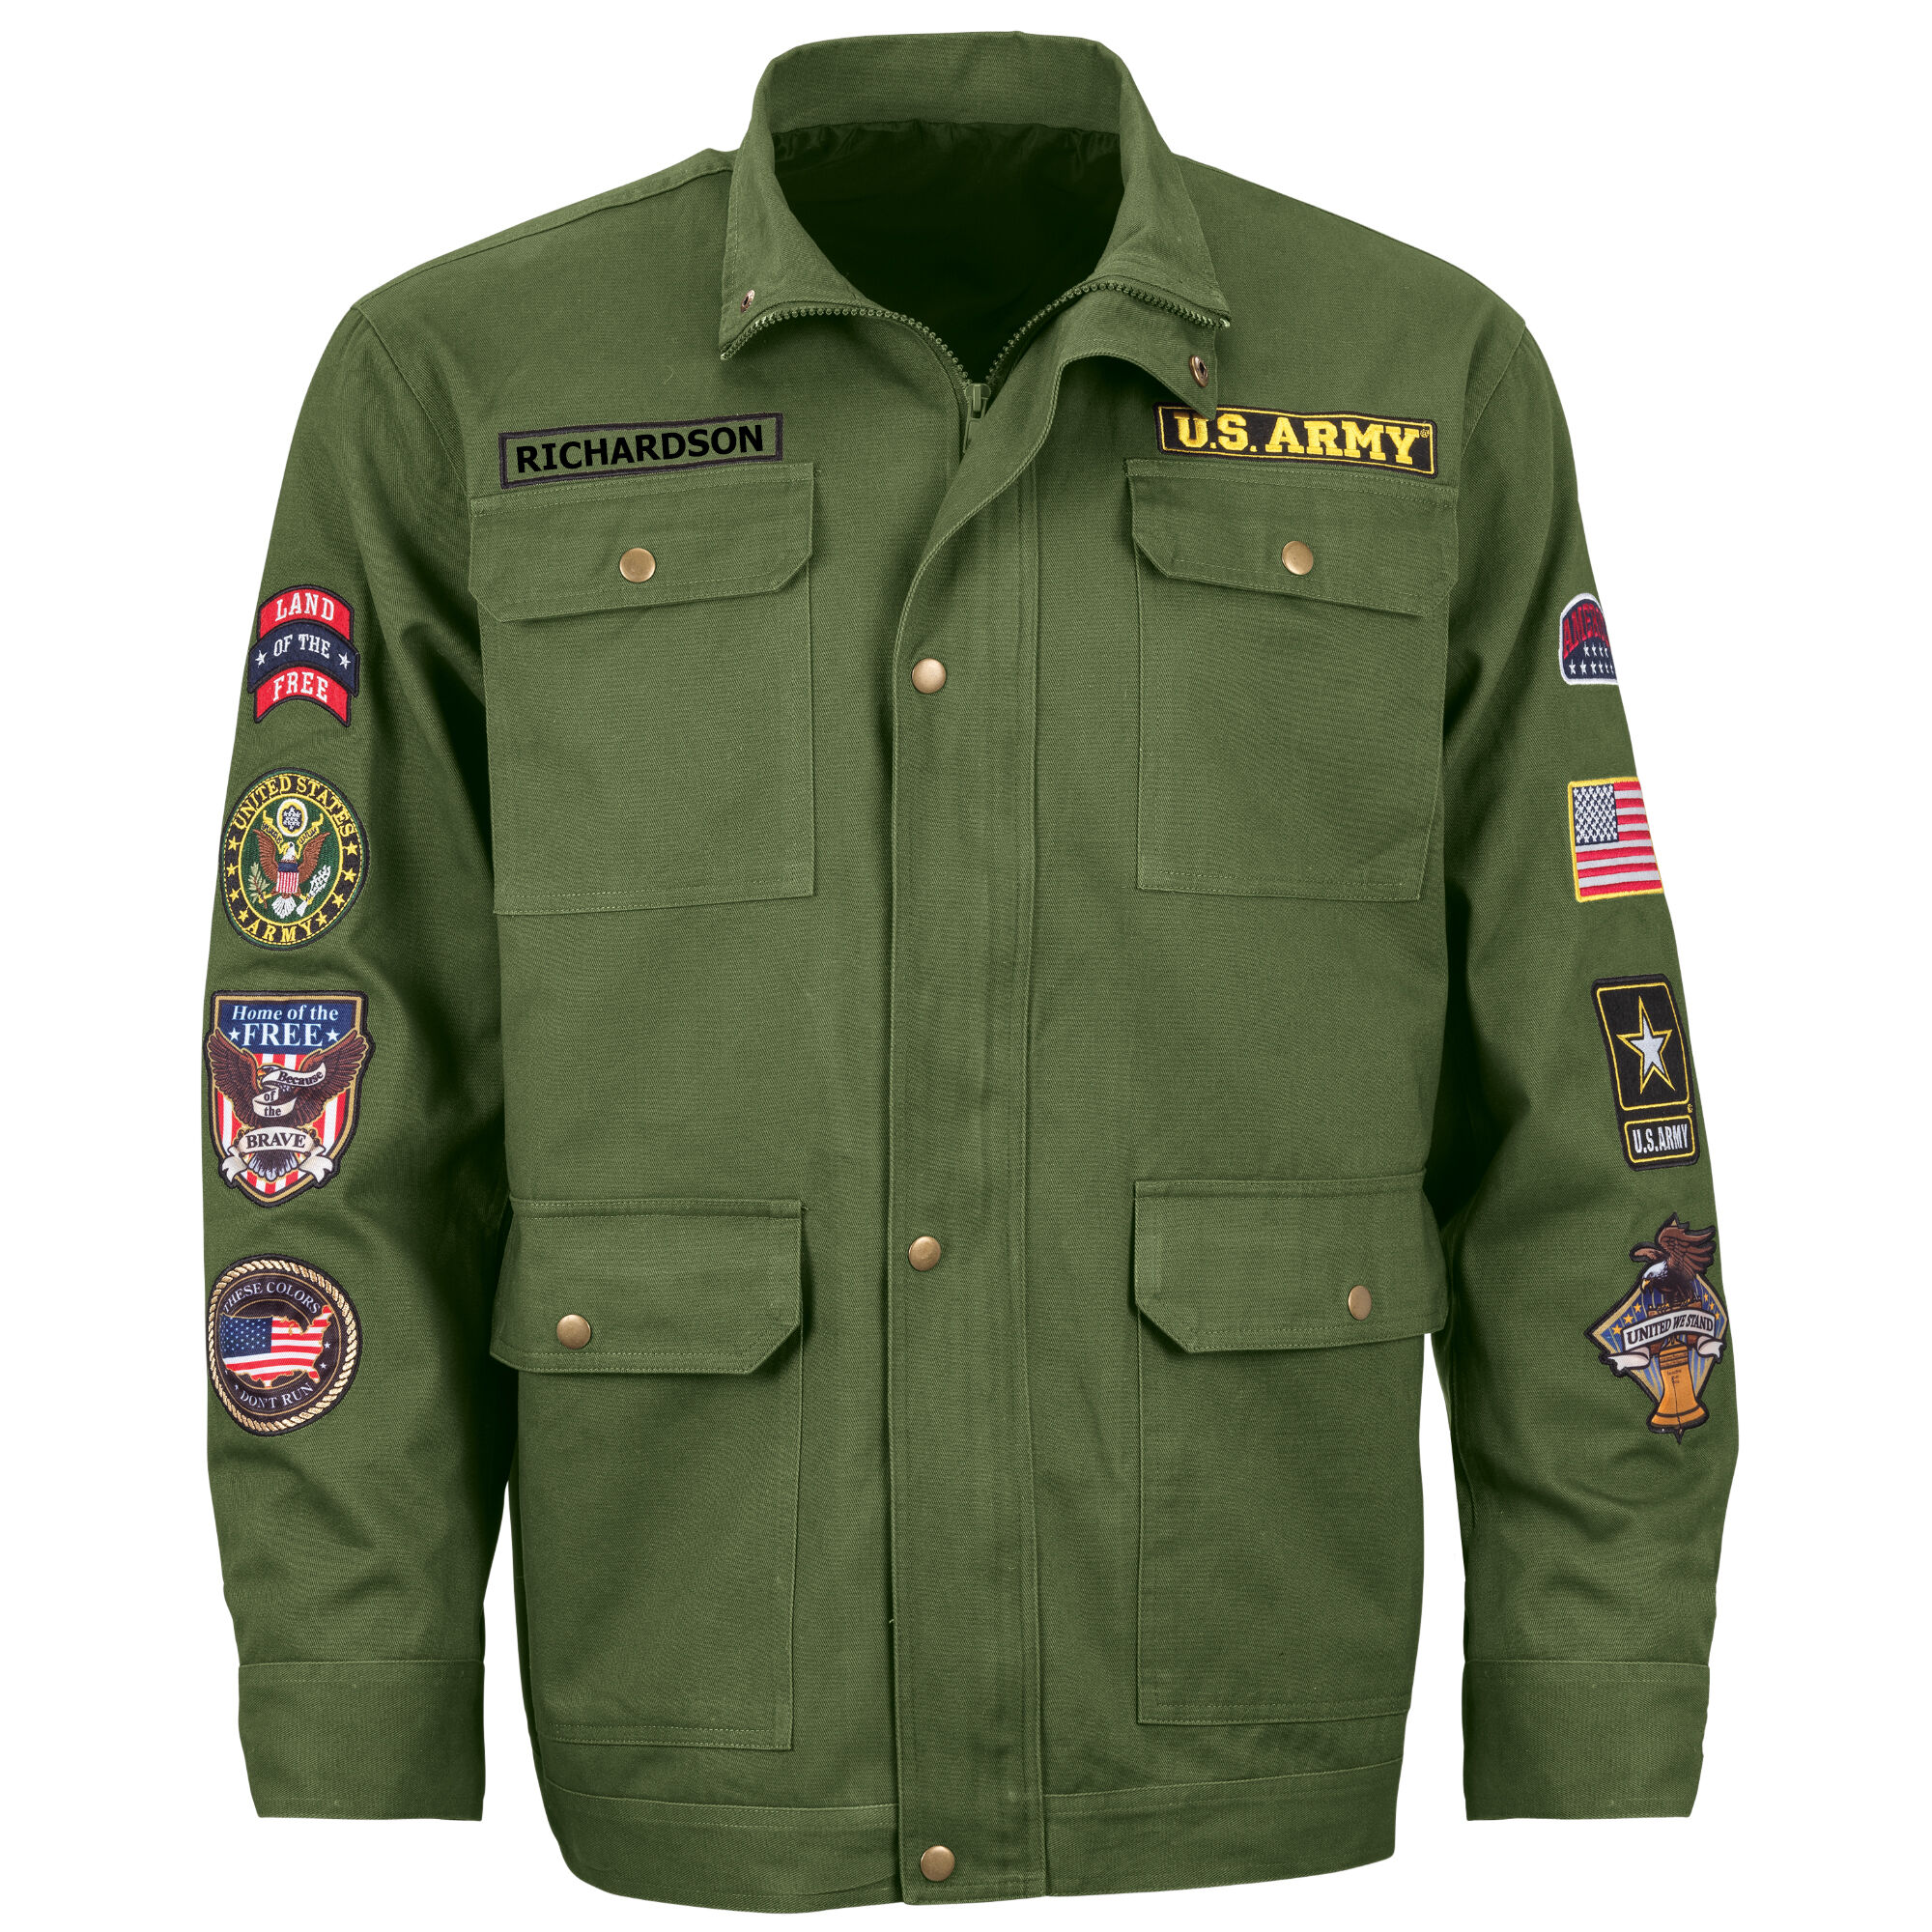 Personalized US Army Field Jacket 10539 0017 a main